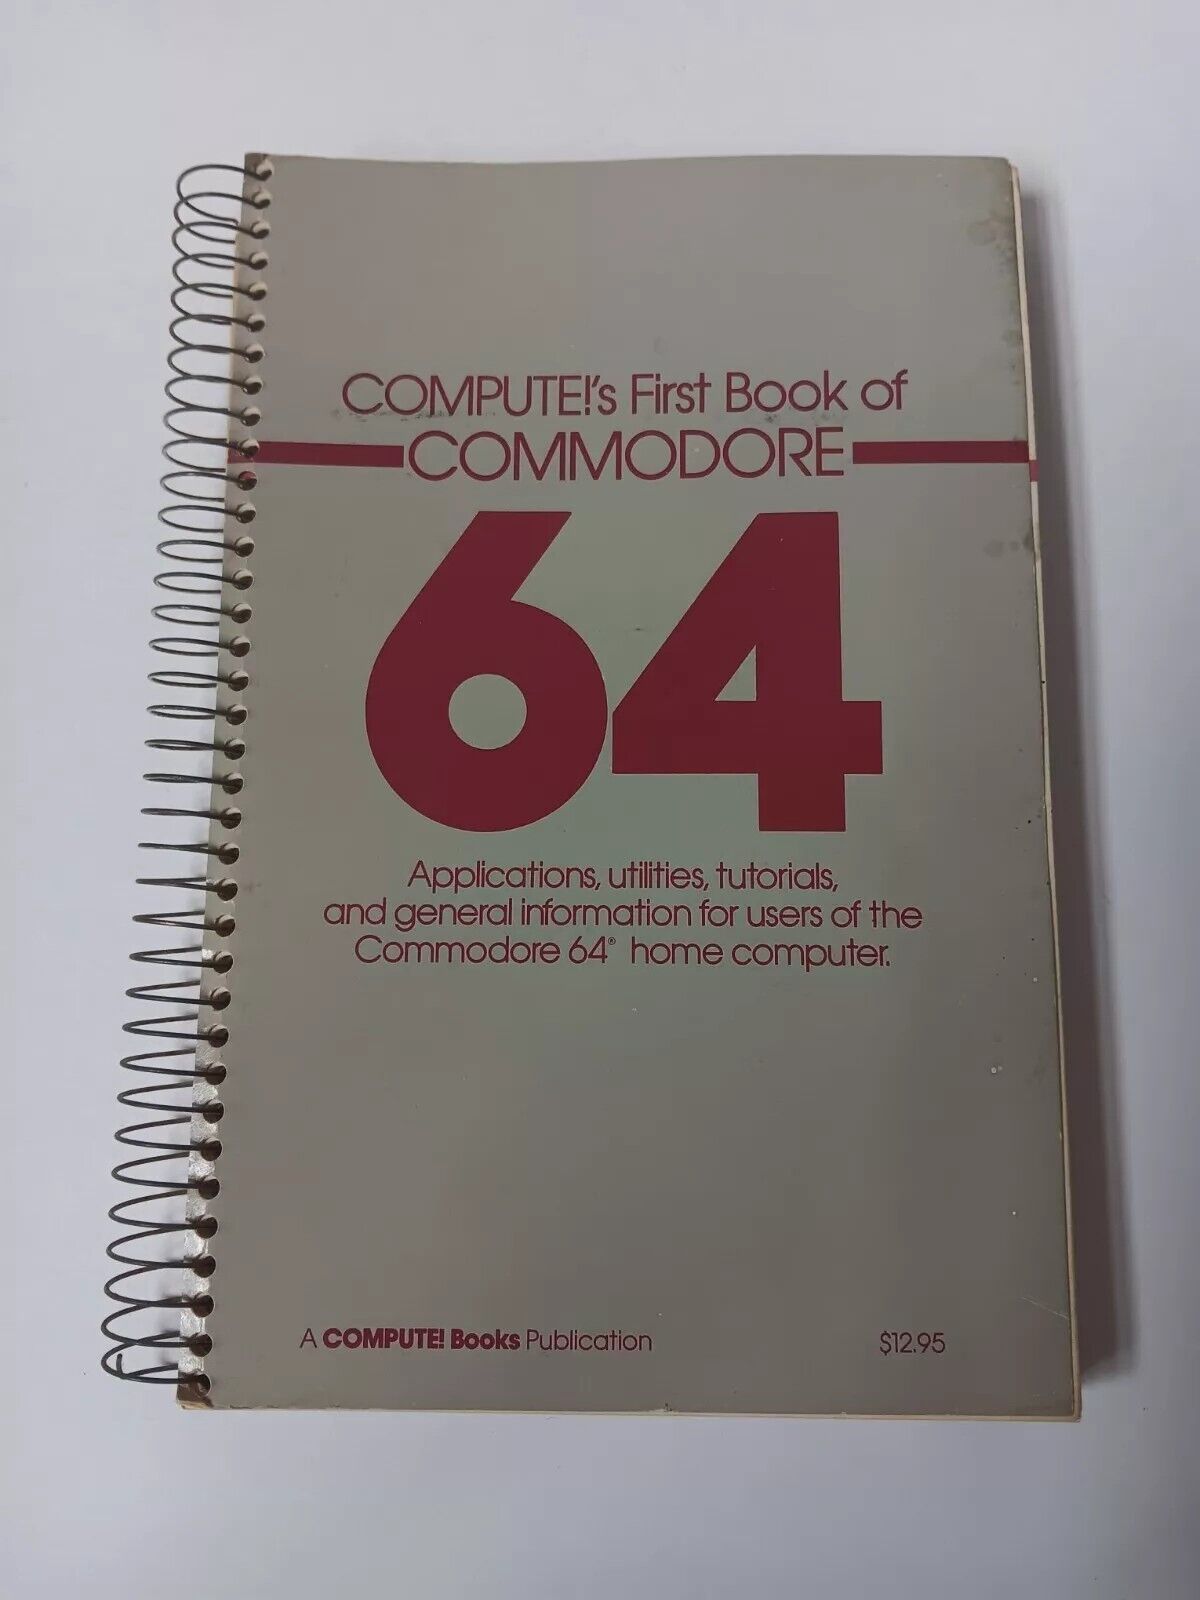 Compute's First Book of Commodore 64 Home Computer Apps/Utilities/Tutorials 